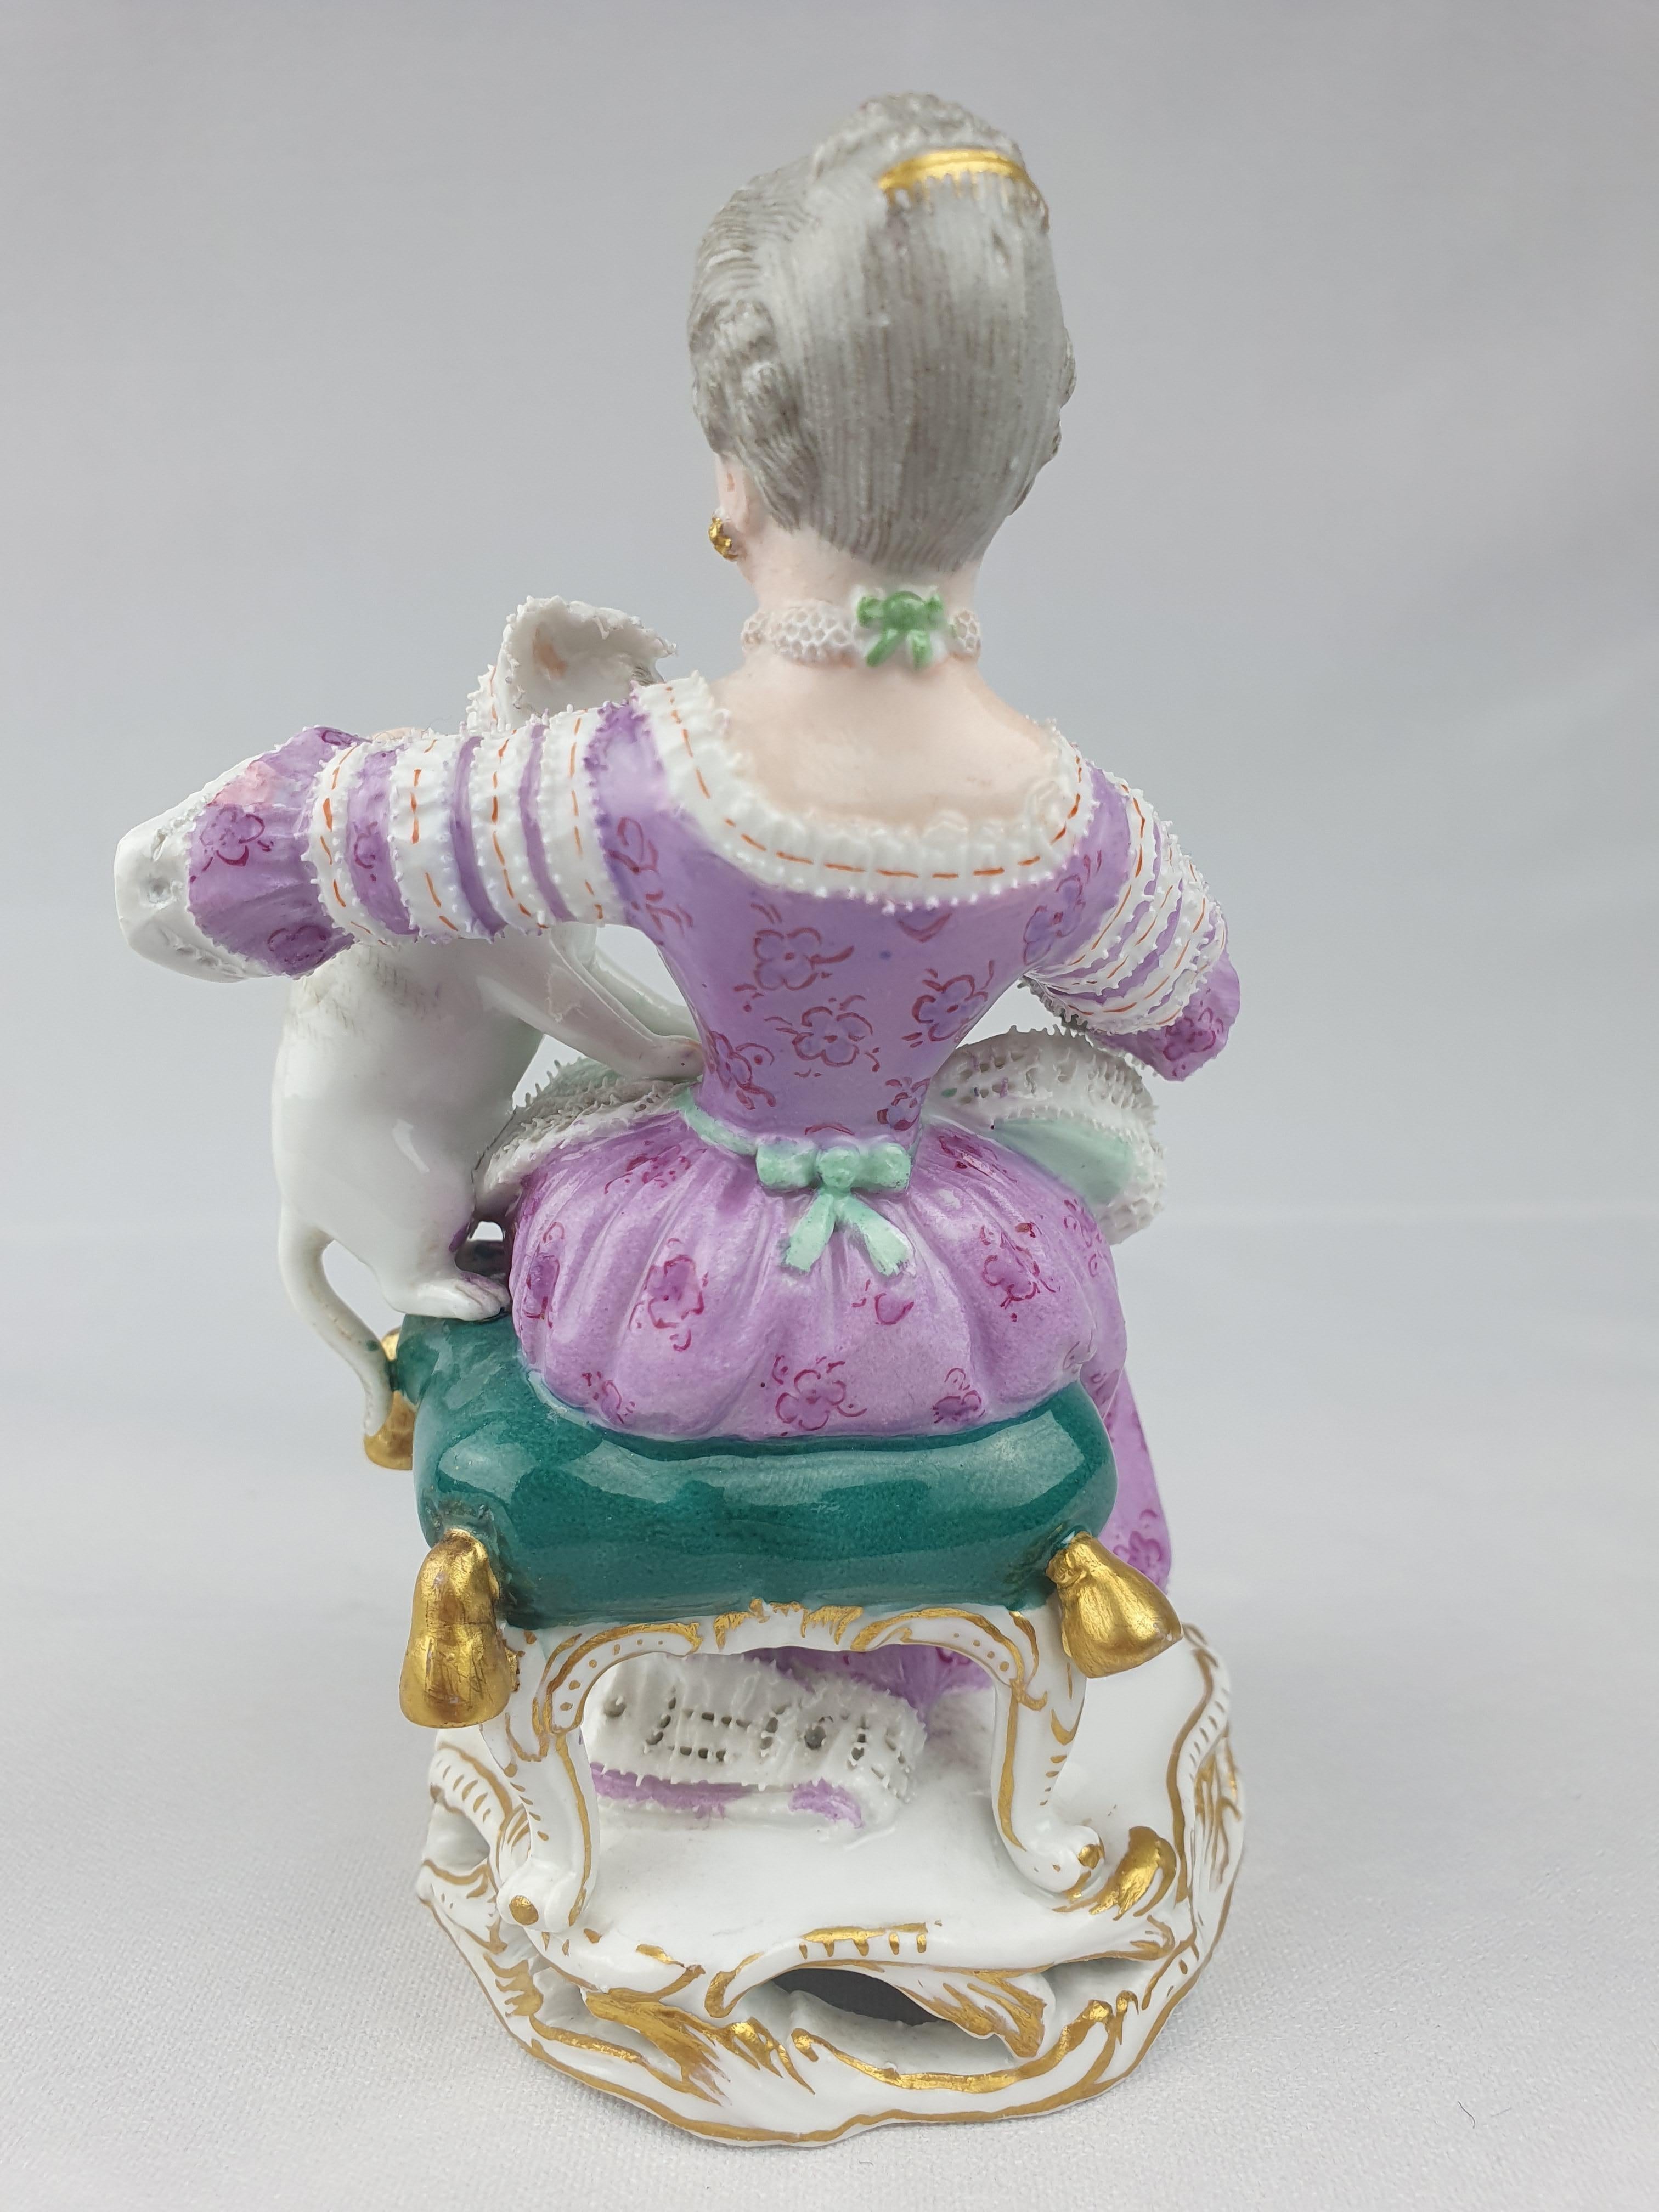 Meissen figure of a girl holding a cat on her lap which she is feeding with milk from a saucer. First modelled c1750.

Circa 1870

Height 12cm / 4.72inches

Model number B94

Painters mark 58

Blue crossed swords.